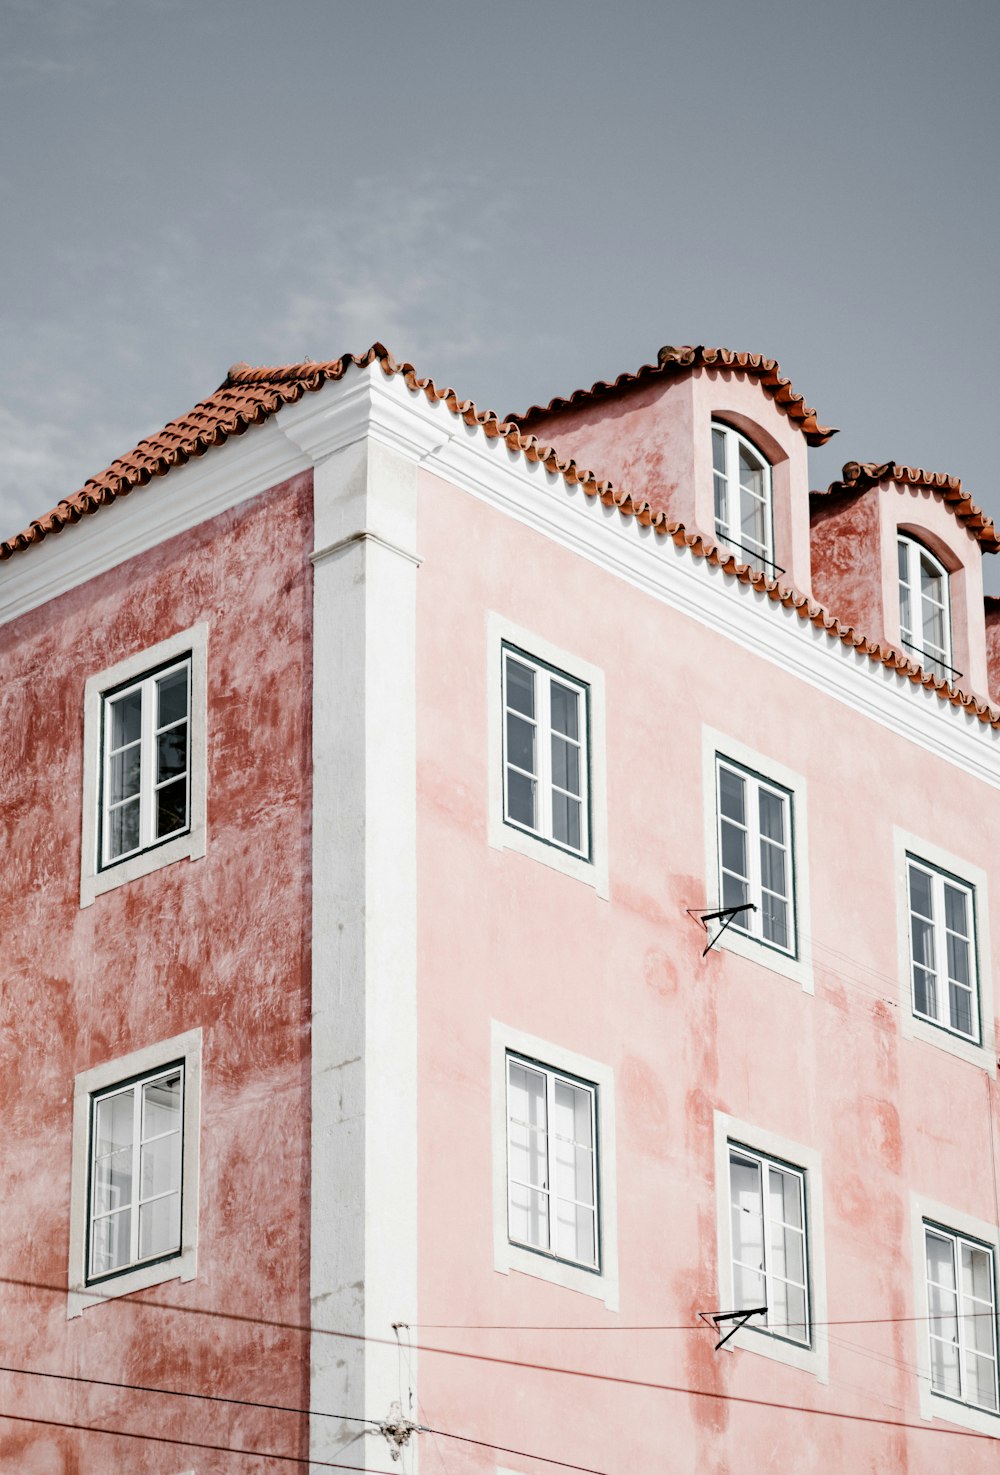 low angle photography of pink and red building structure